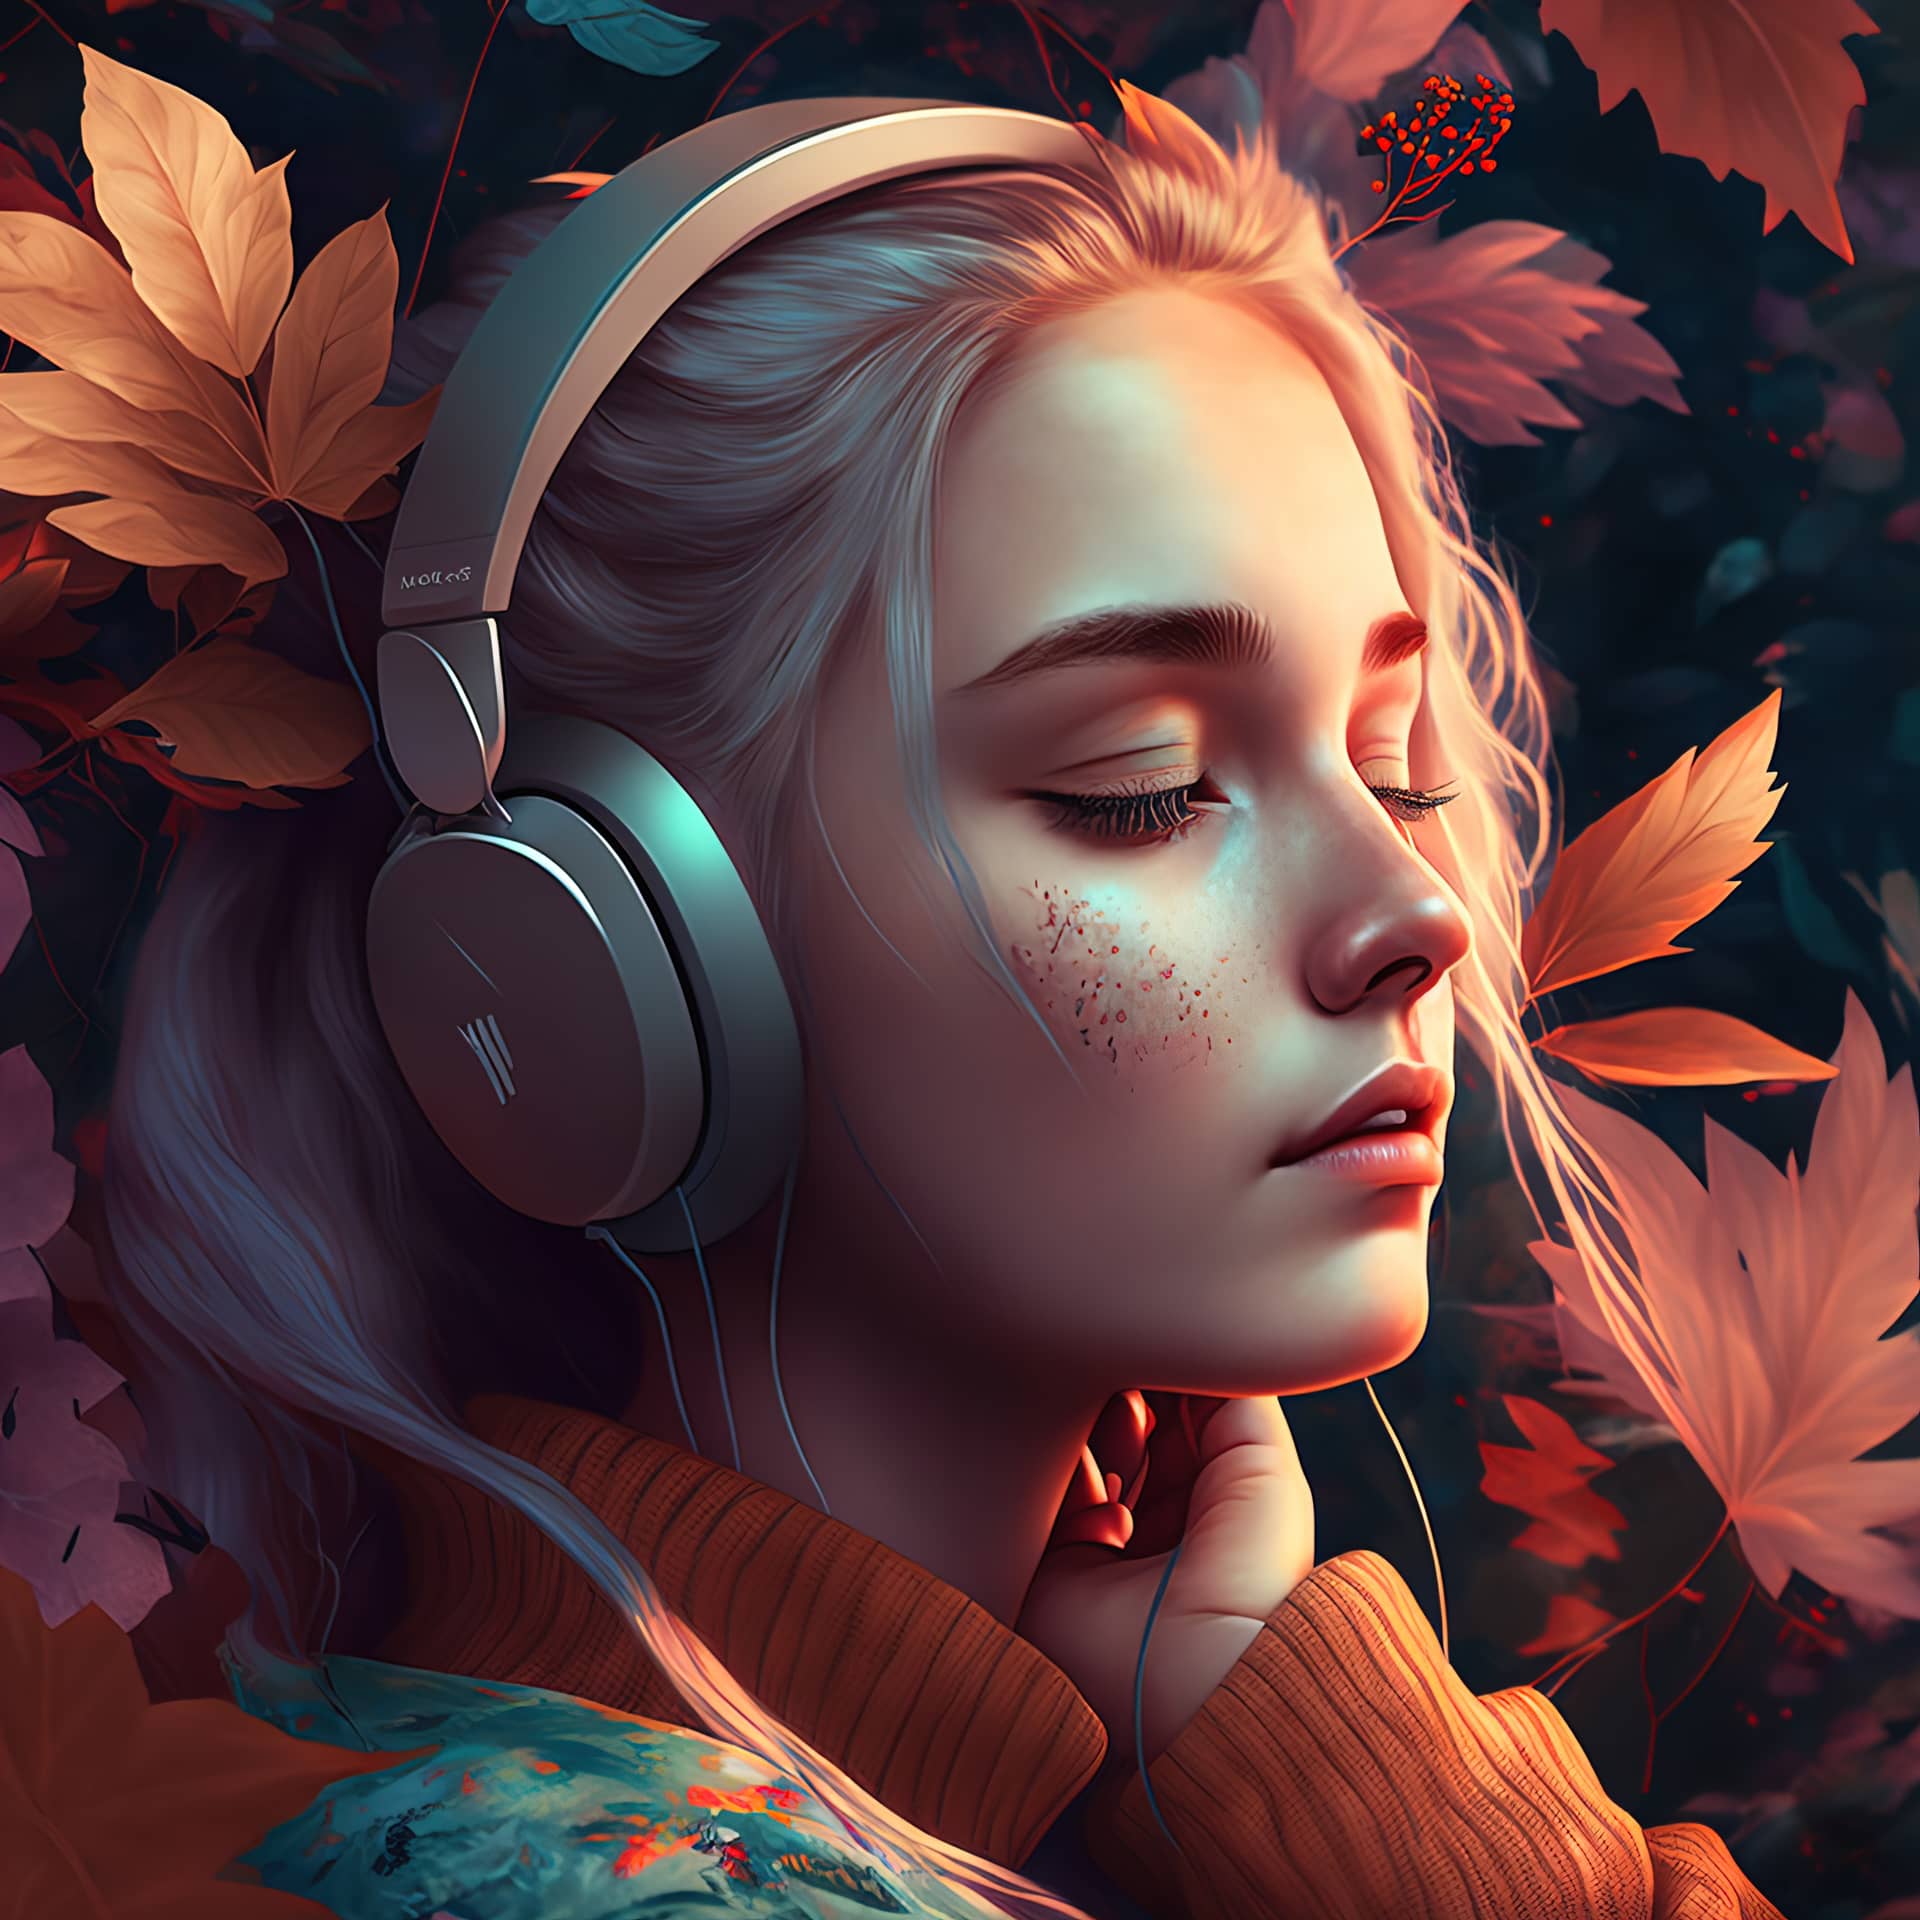 Girl listening calm relaxing music calm peaceful 3d illustration image